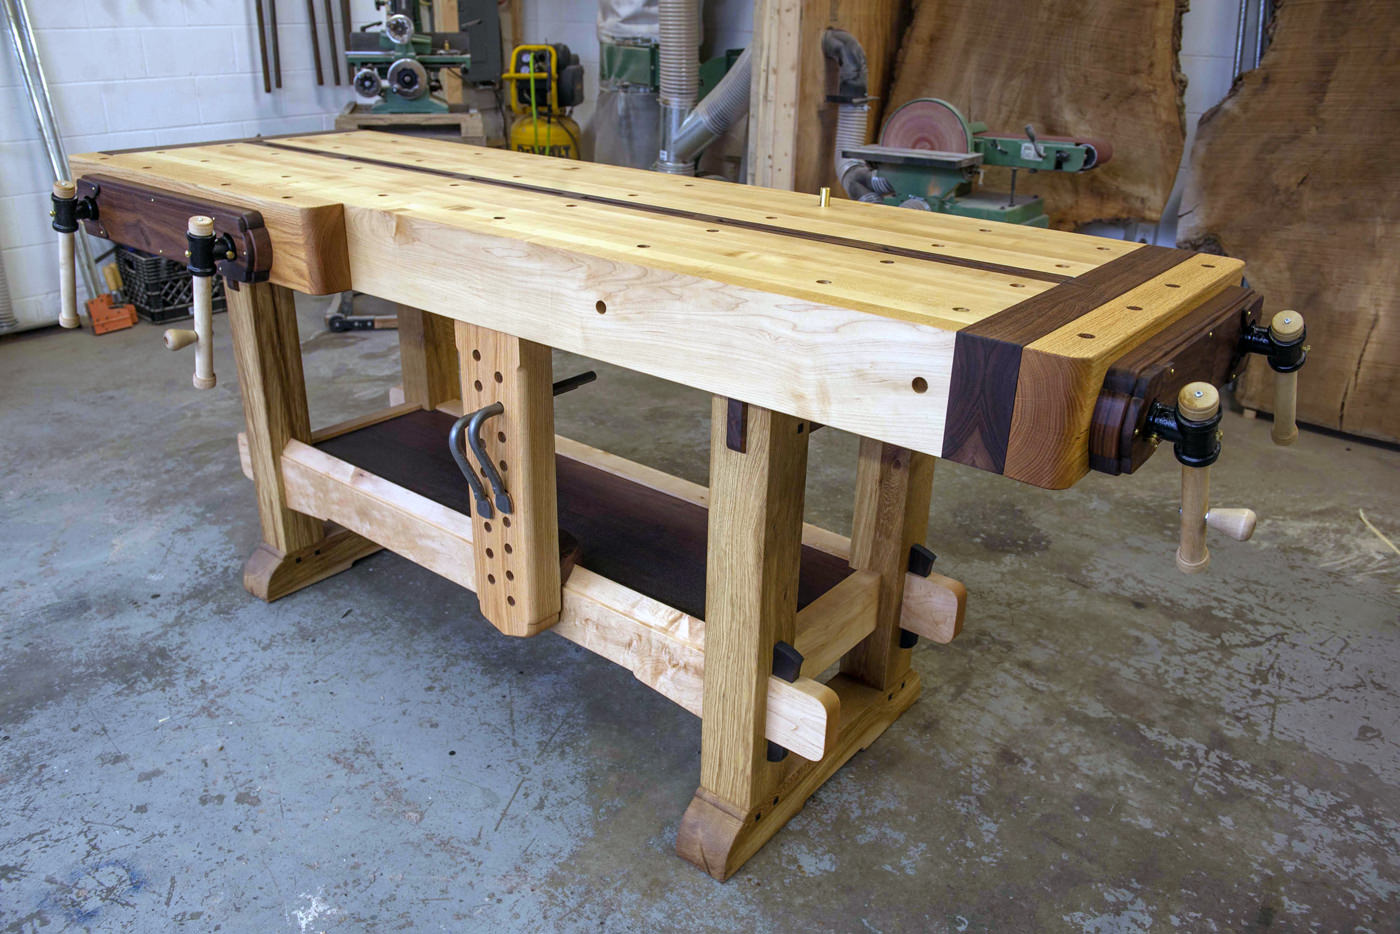 Woodworking workbench Main Image